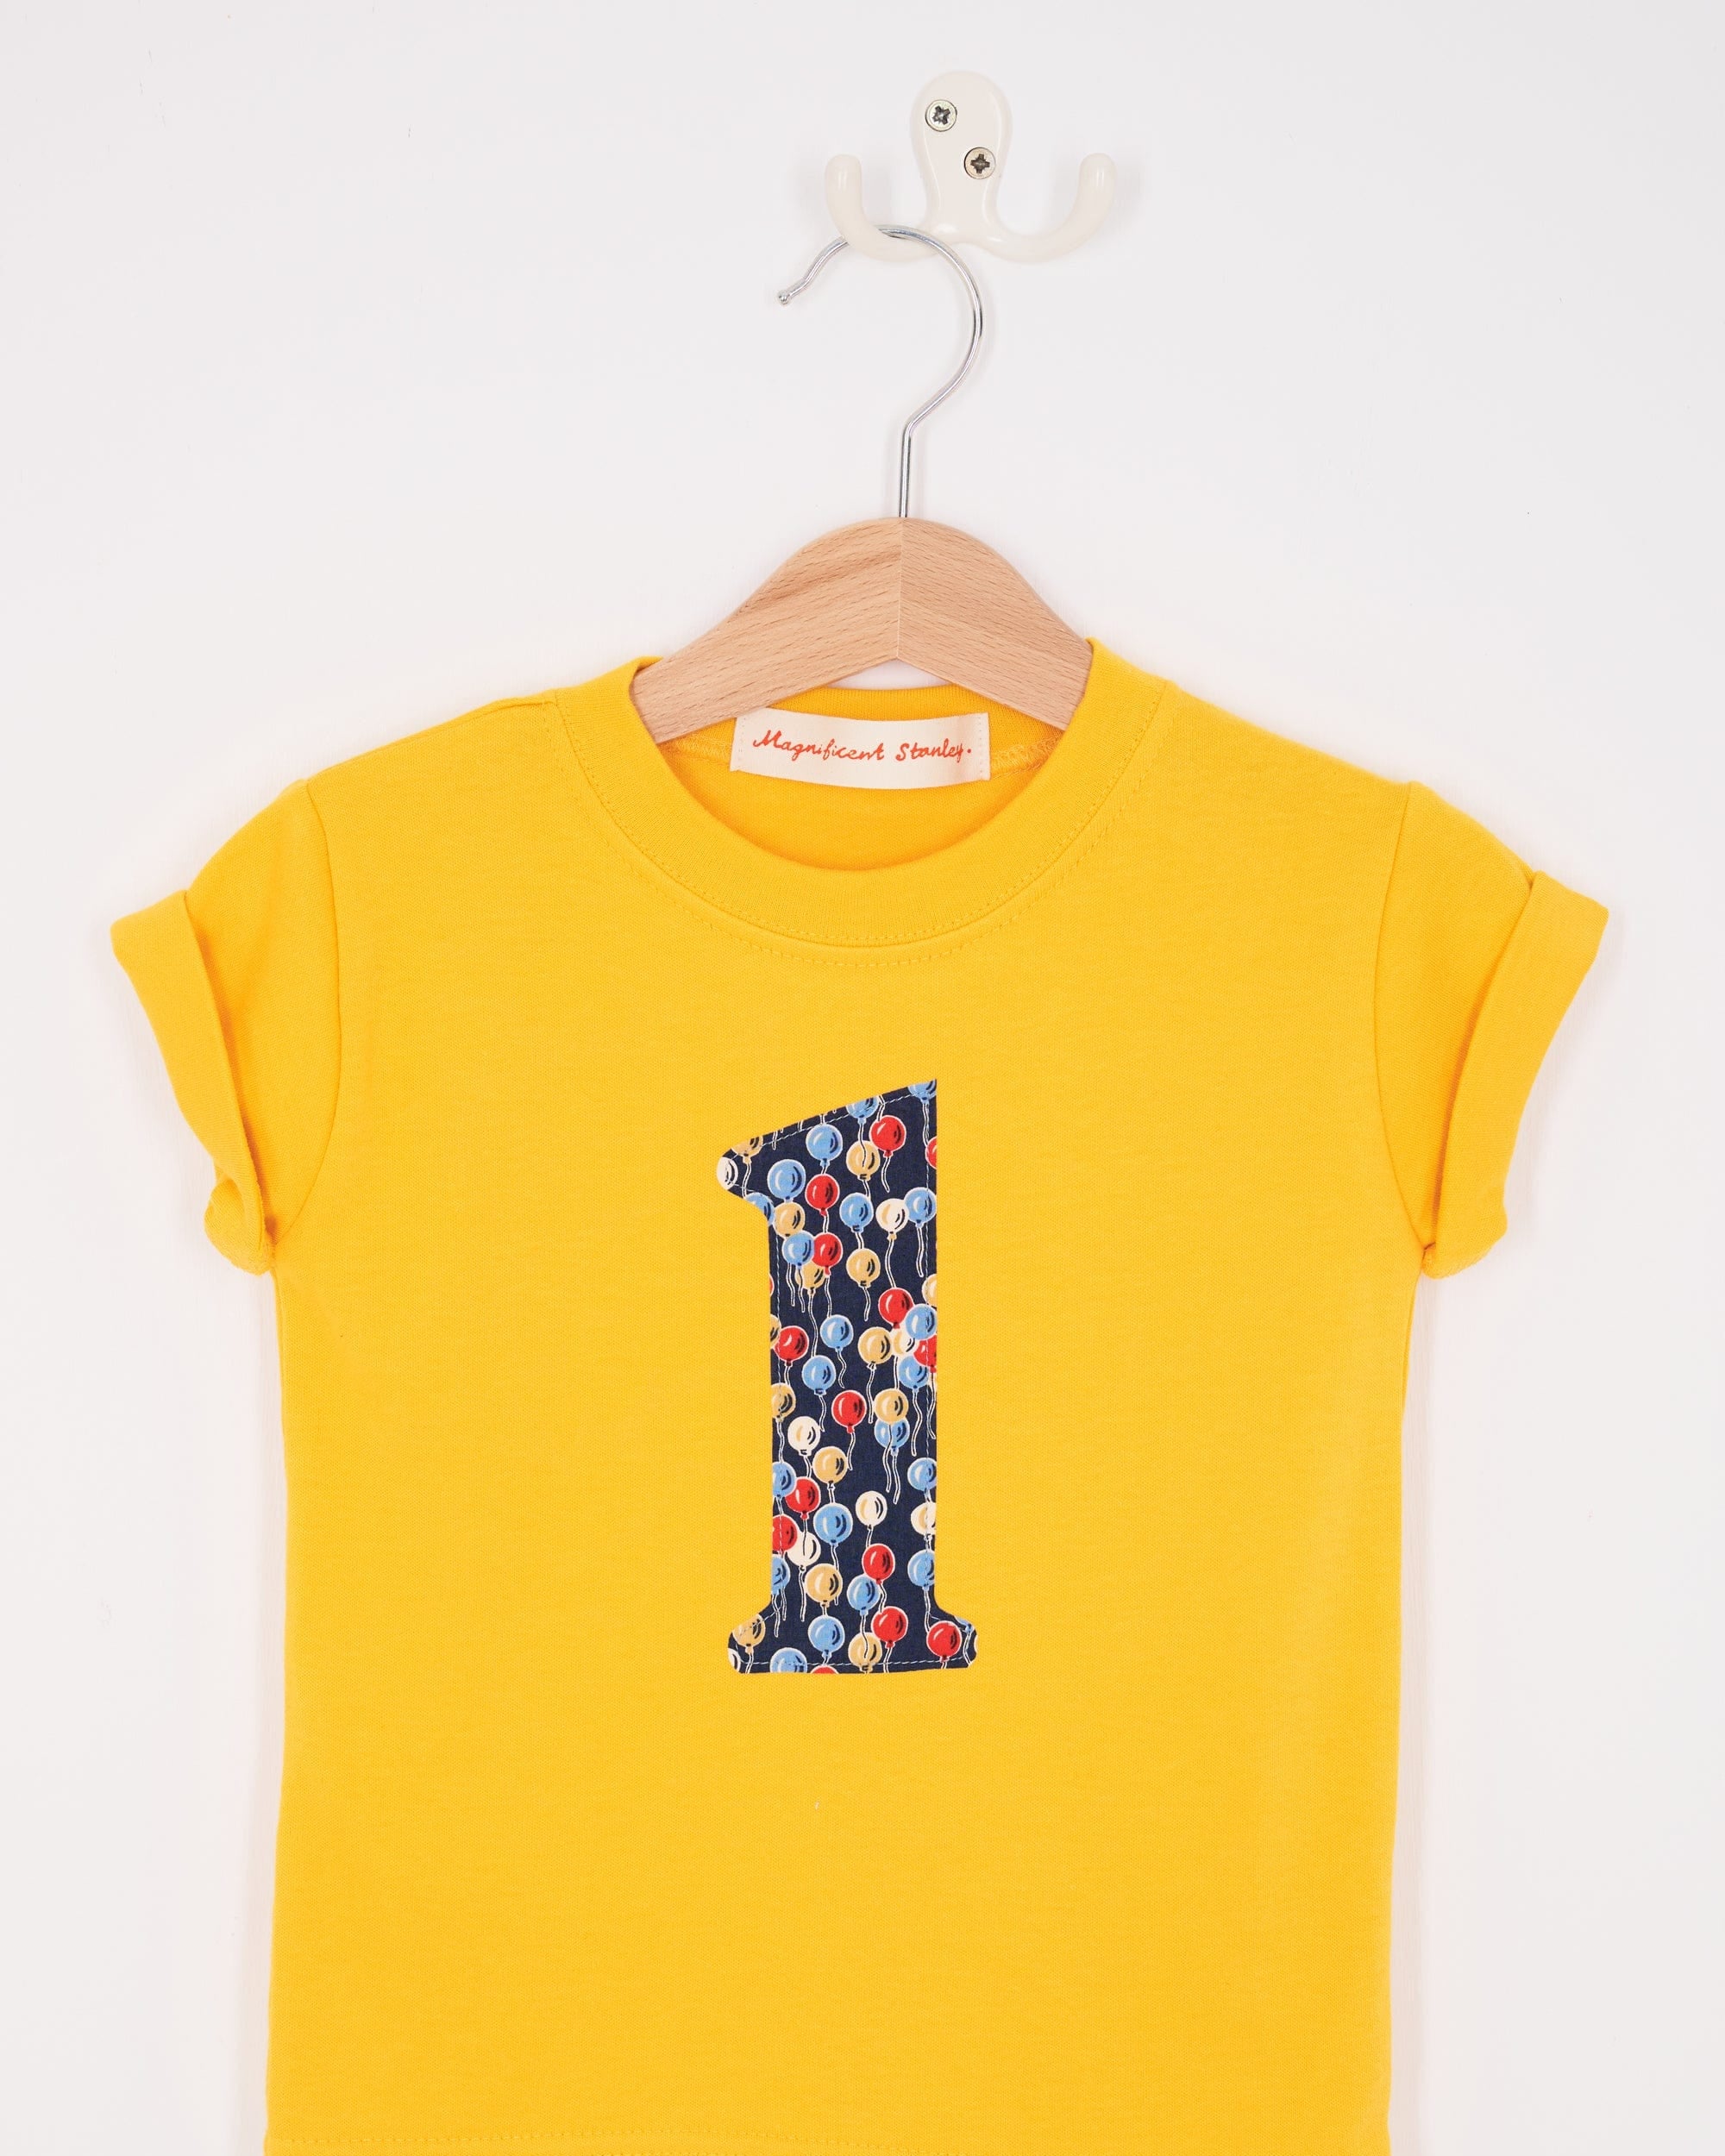 Magnificent Stanley Tee Personalised or Number Yellow T-Shirt in Ethan's Party Liberty Print